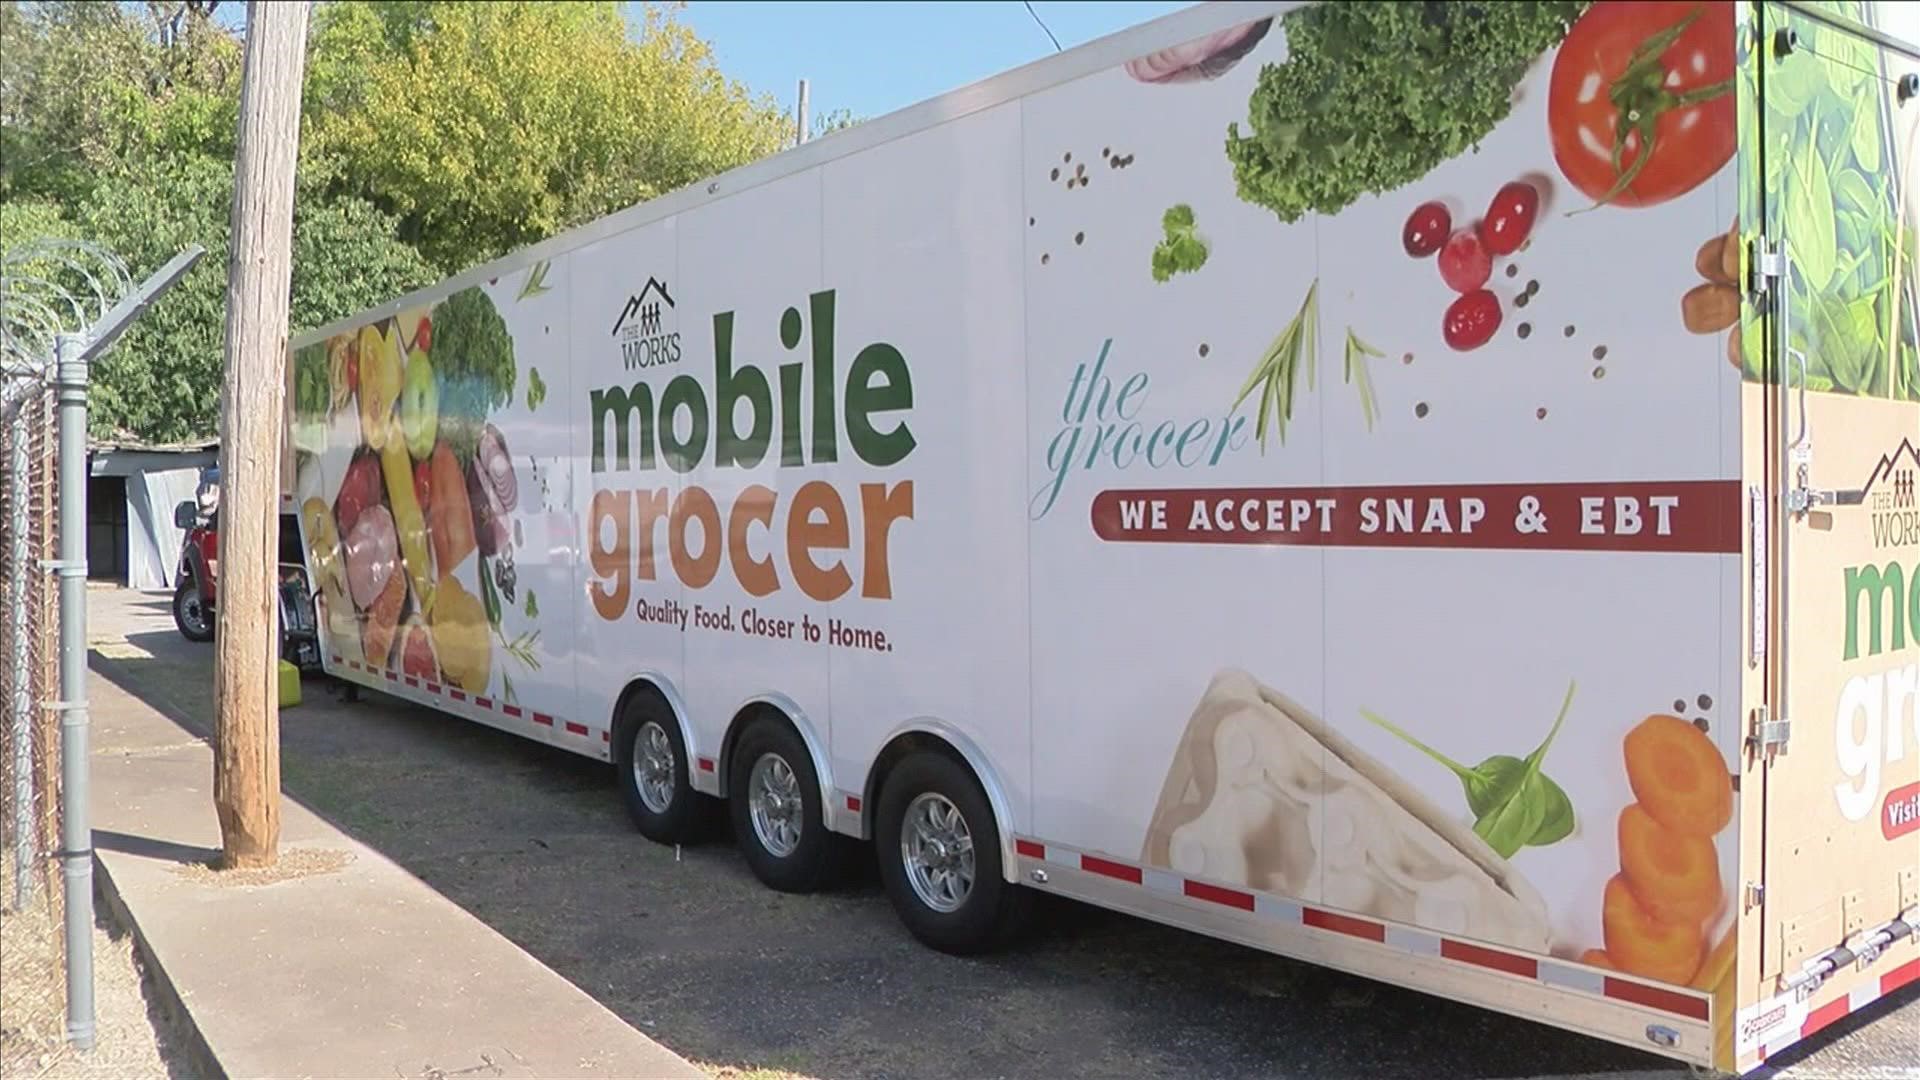 The mobile store is now in Klondike area and will move soon to other areas where full grocery stores and fresh produce aren't available for miles.